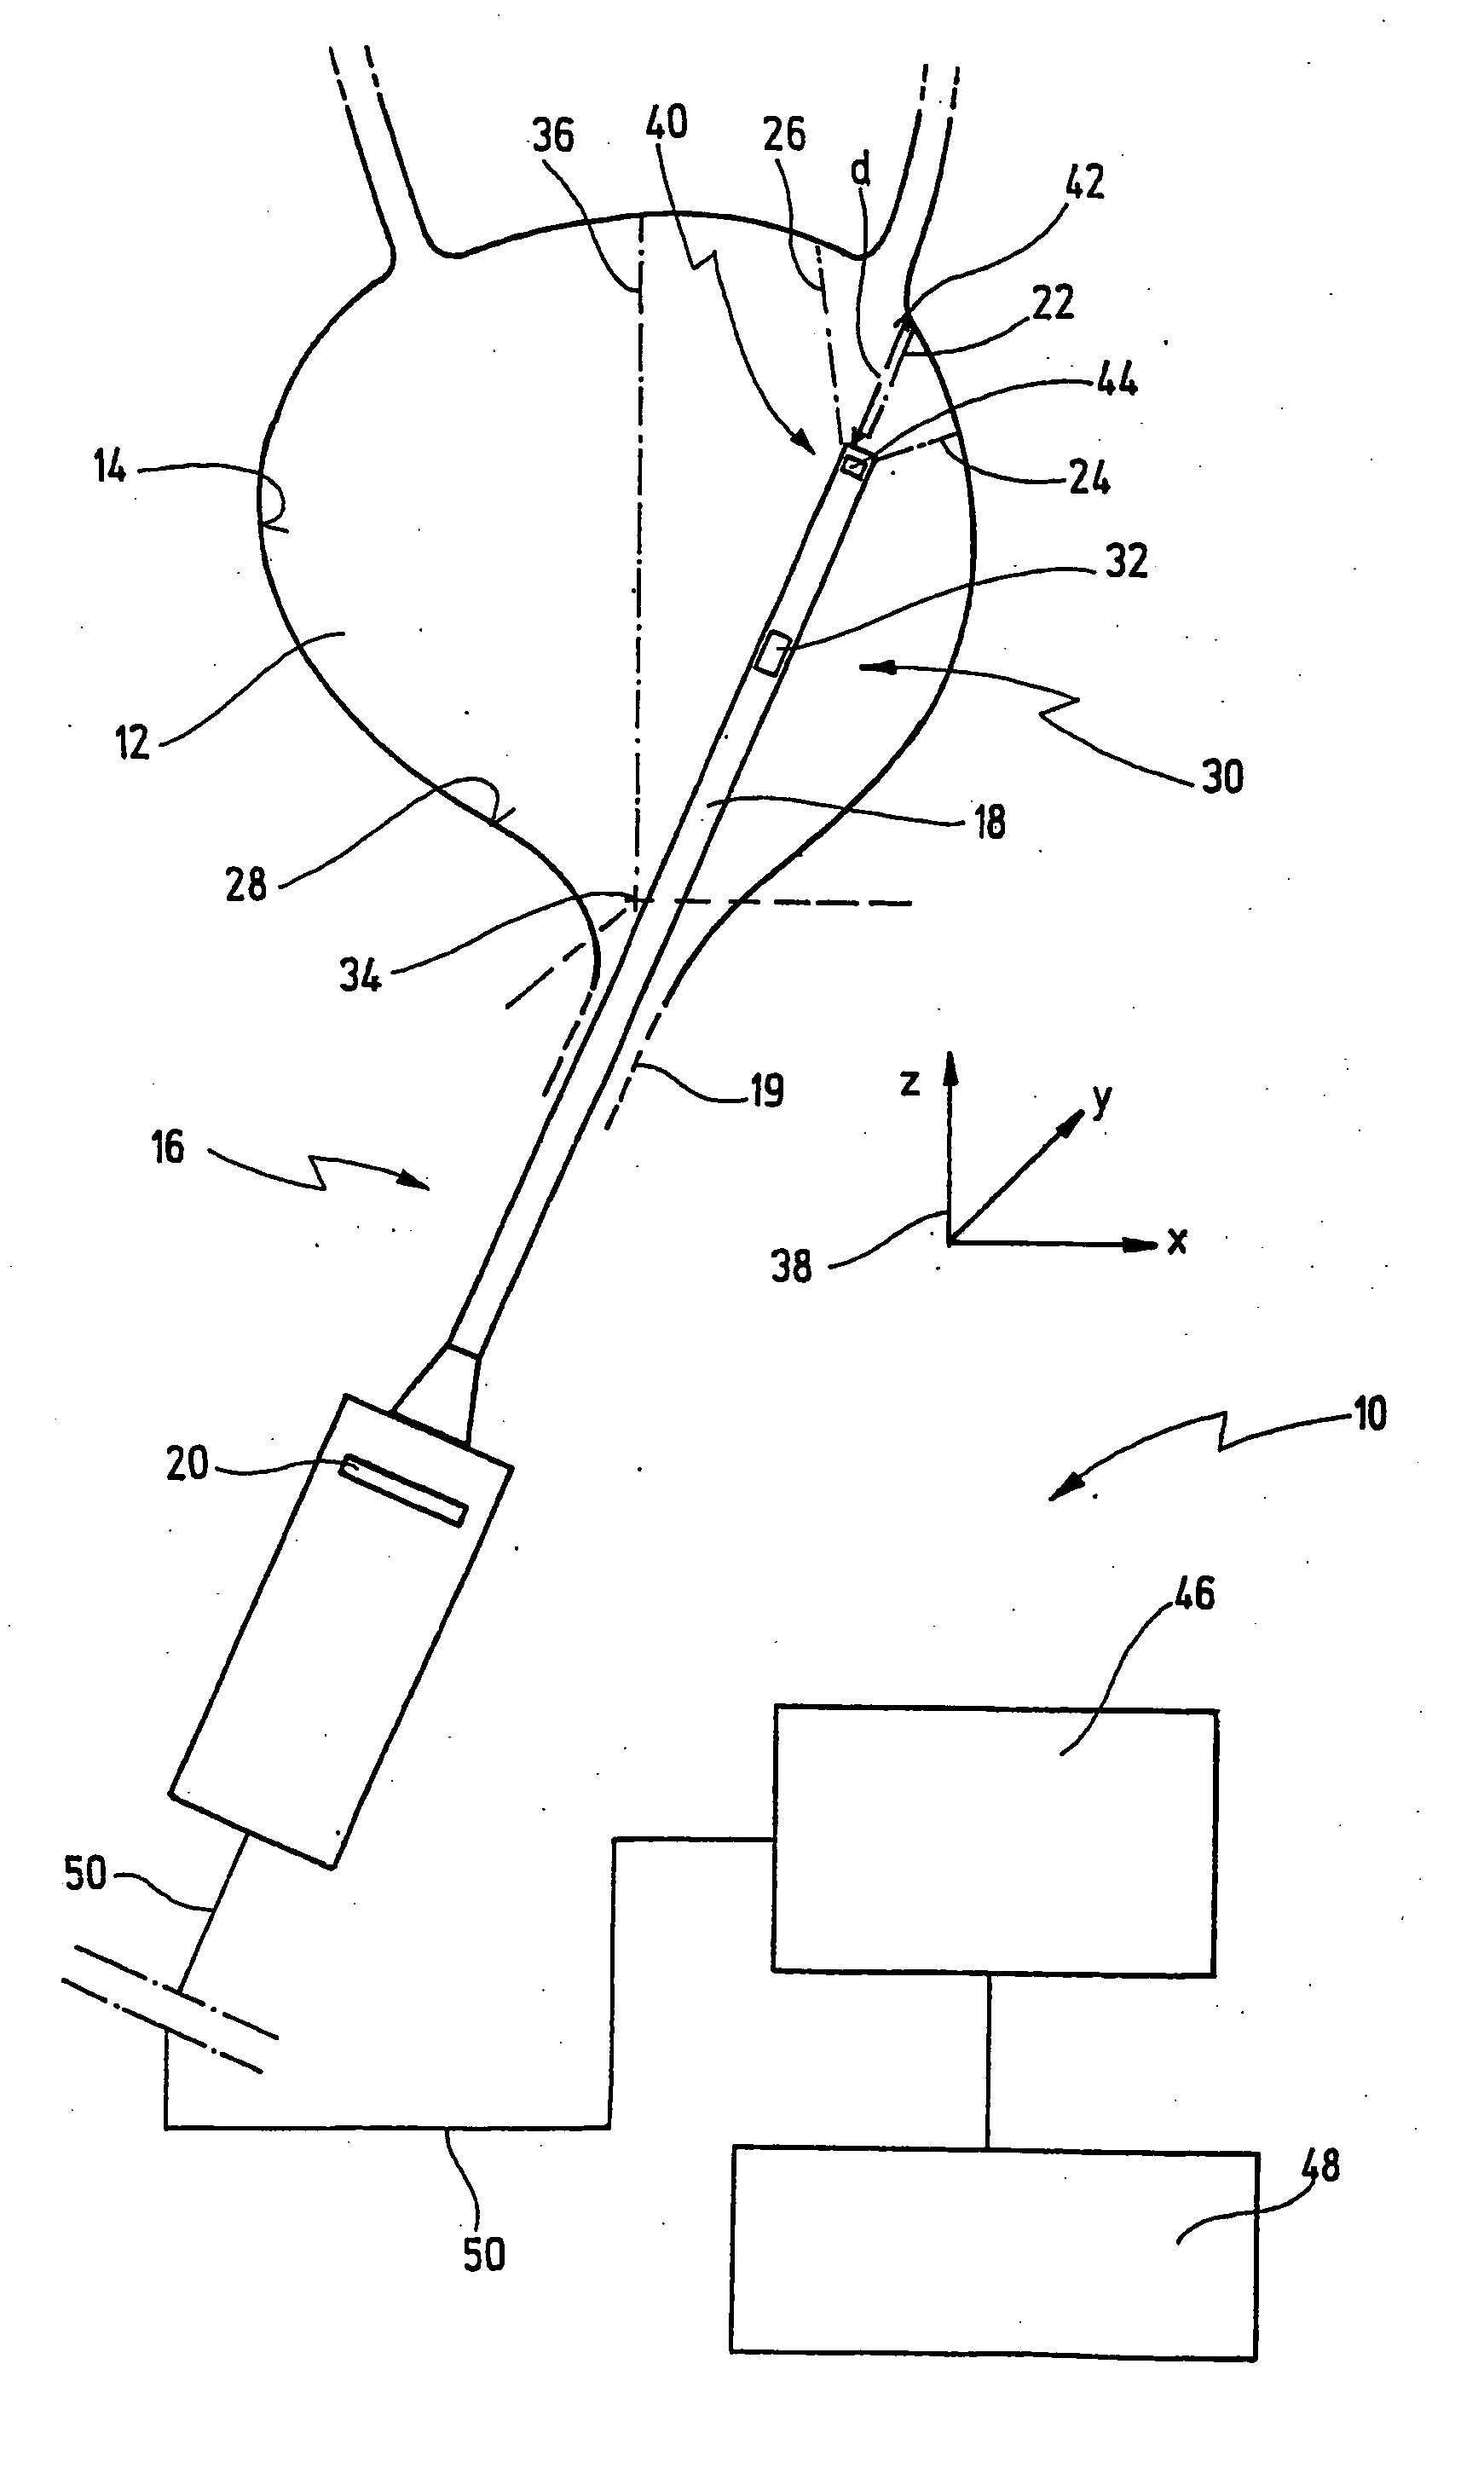 Method and apparatus for generating at least one section of a virtual 3D model of a body interior